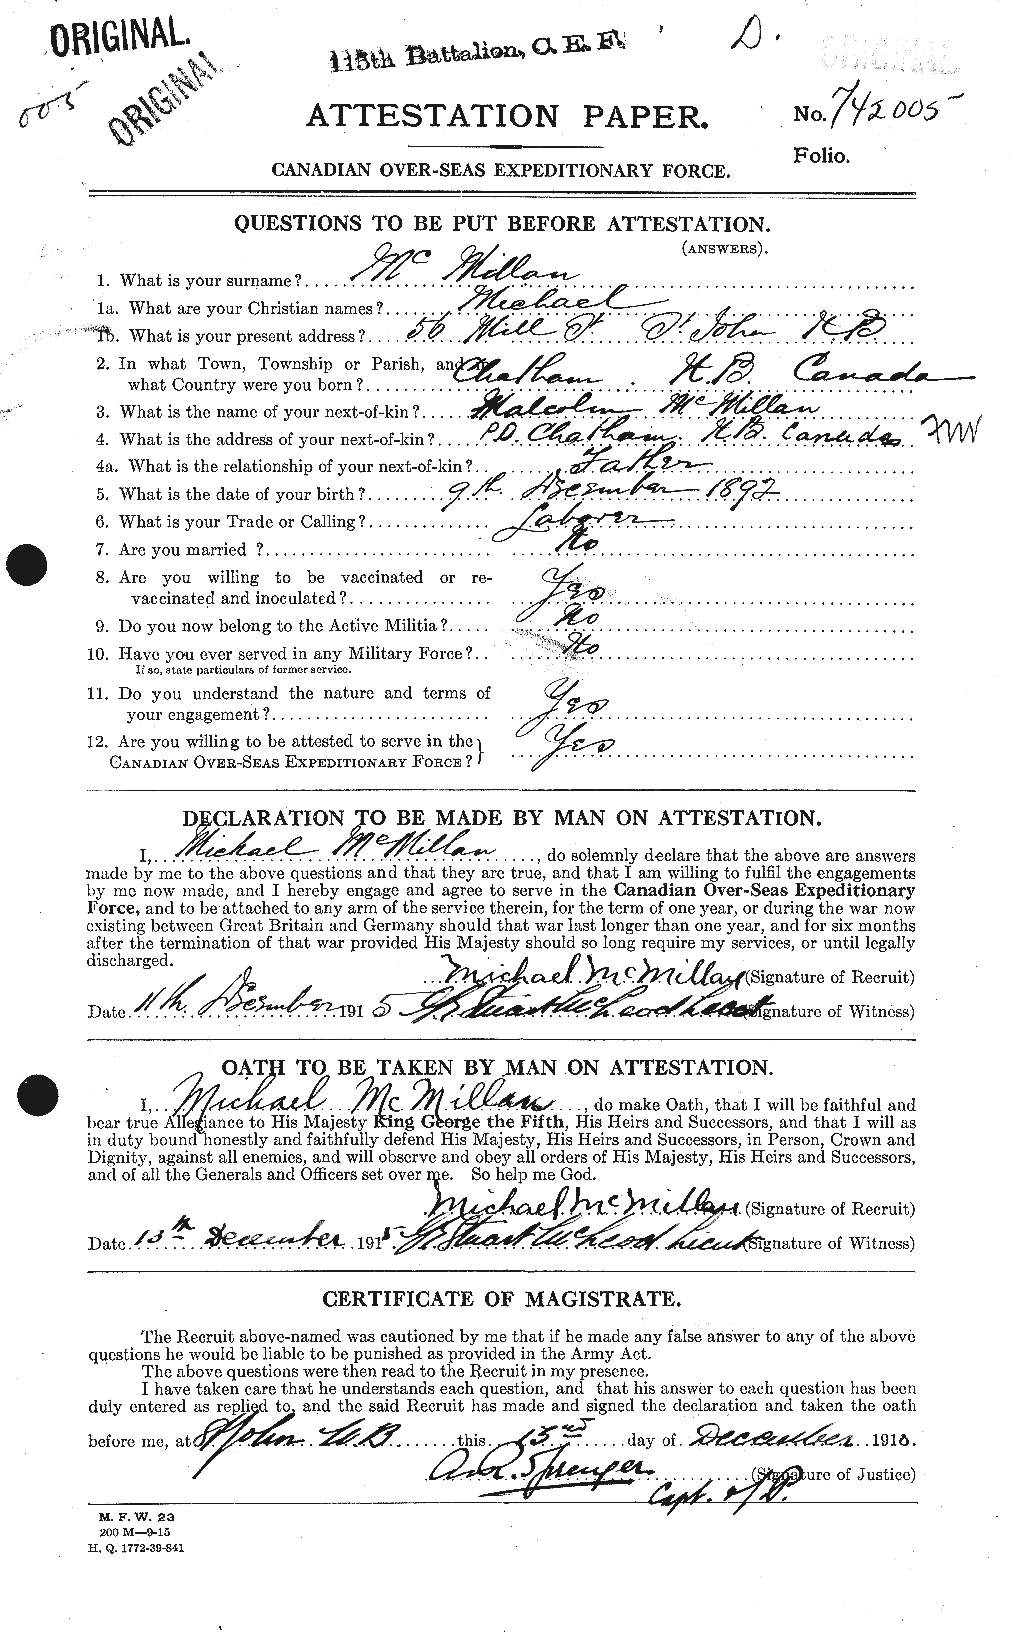 Personnel Records of the First World War - CEF 536853a